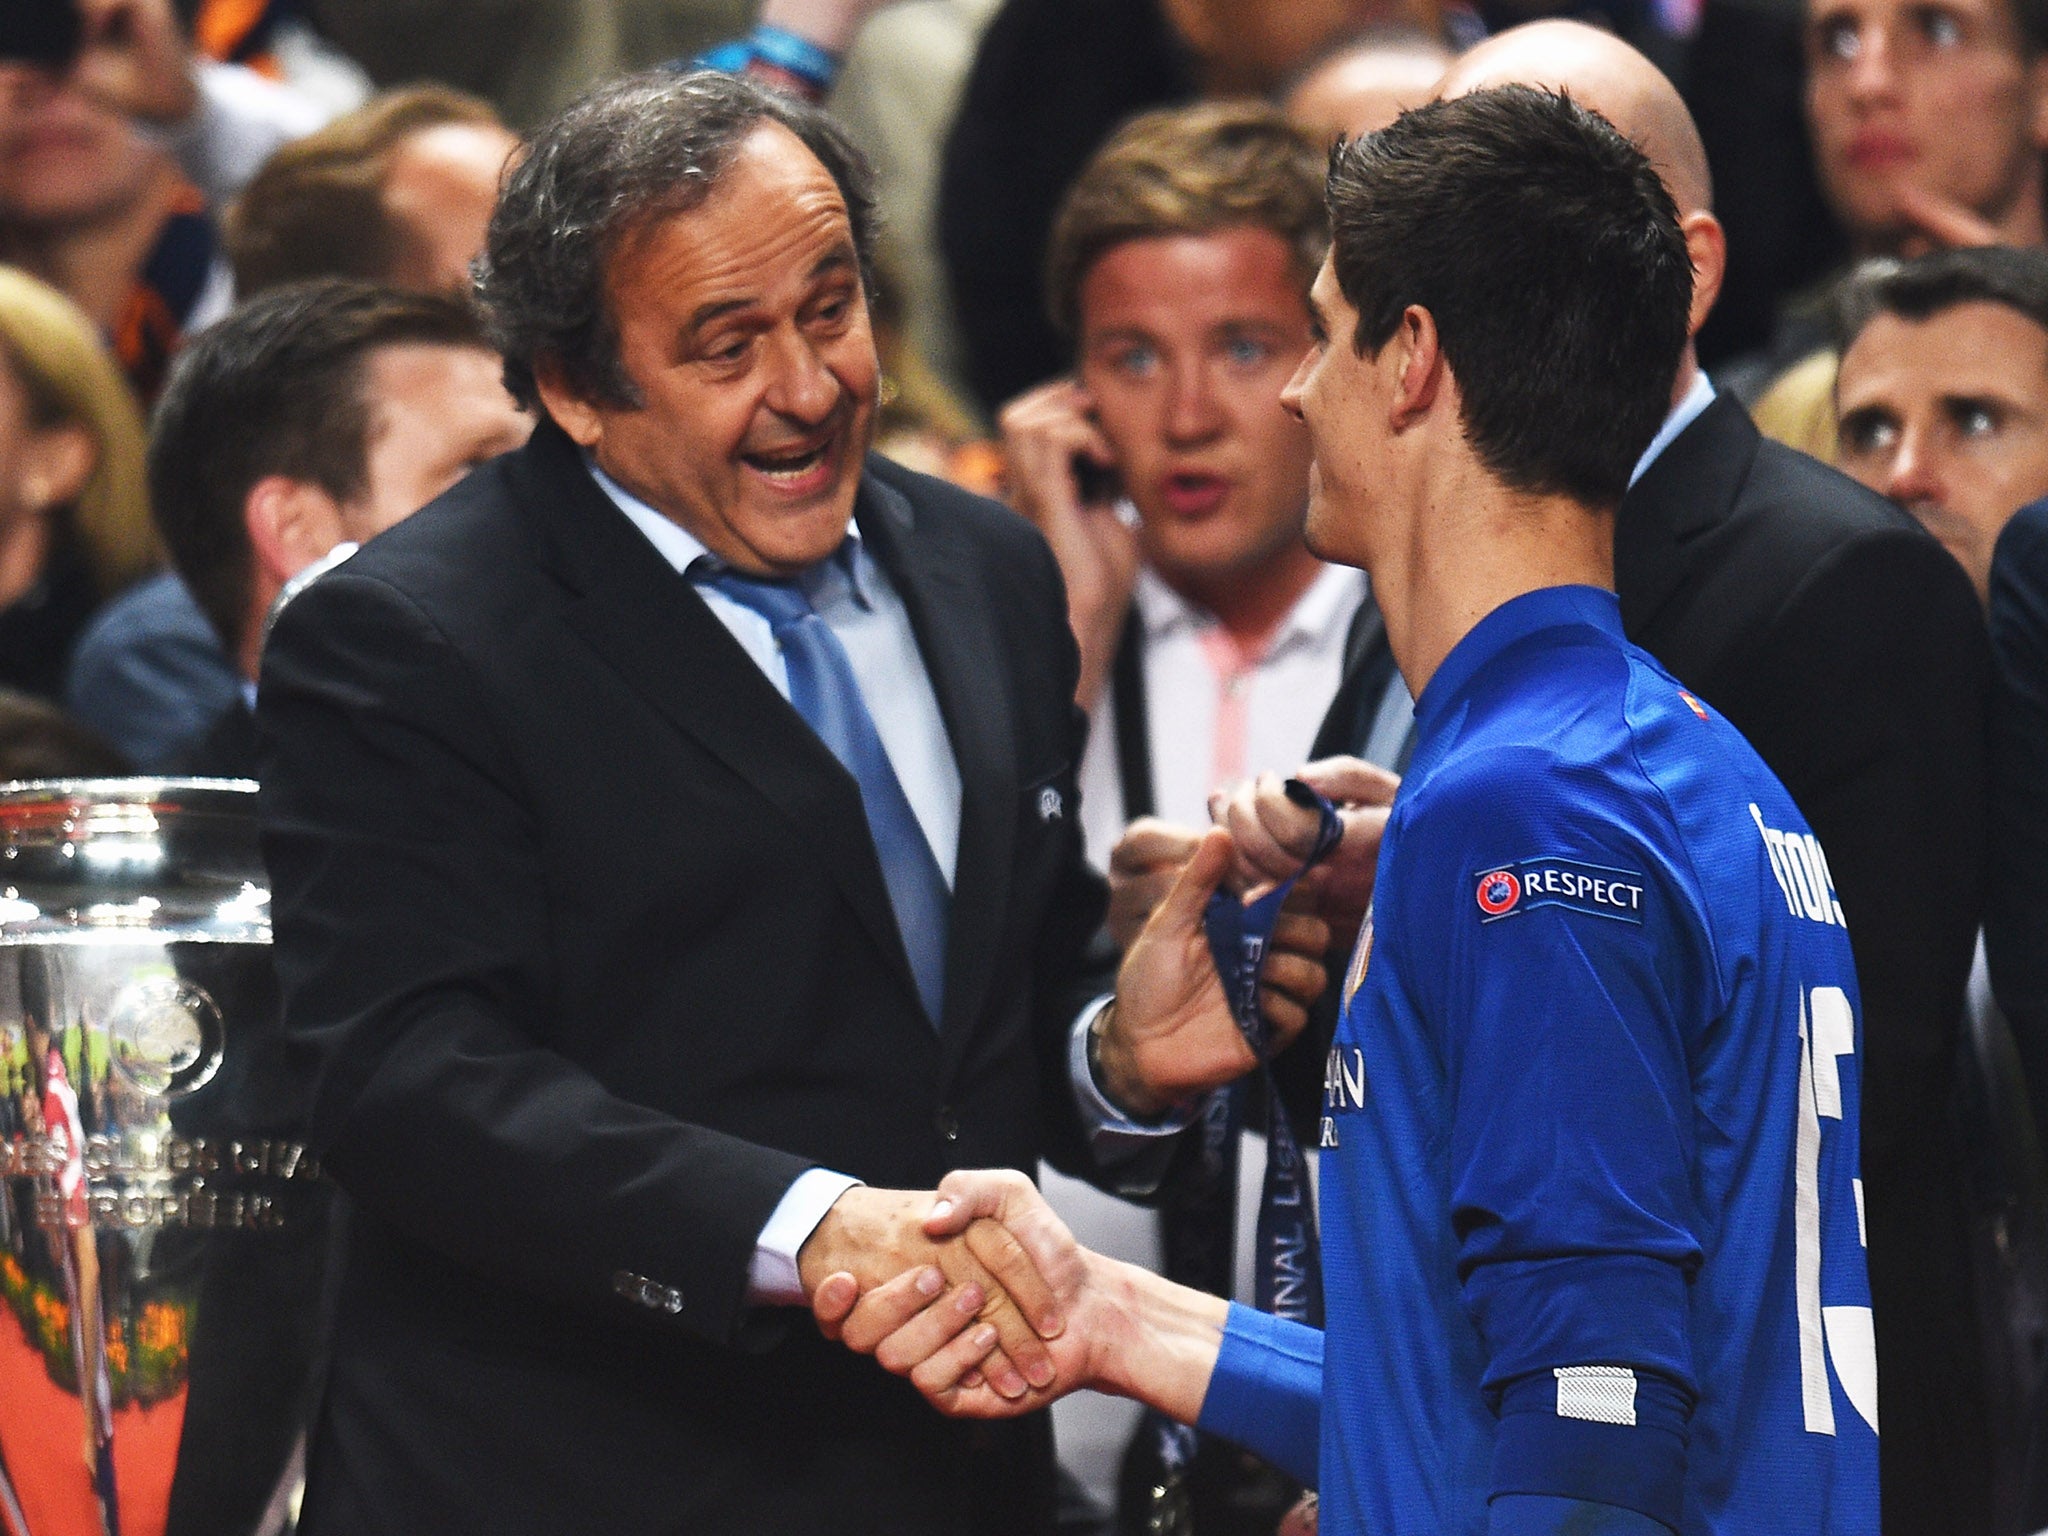 Thibaut Courtois shakes hands with Real Madrid president Florentino Perez